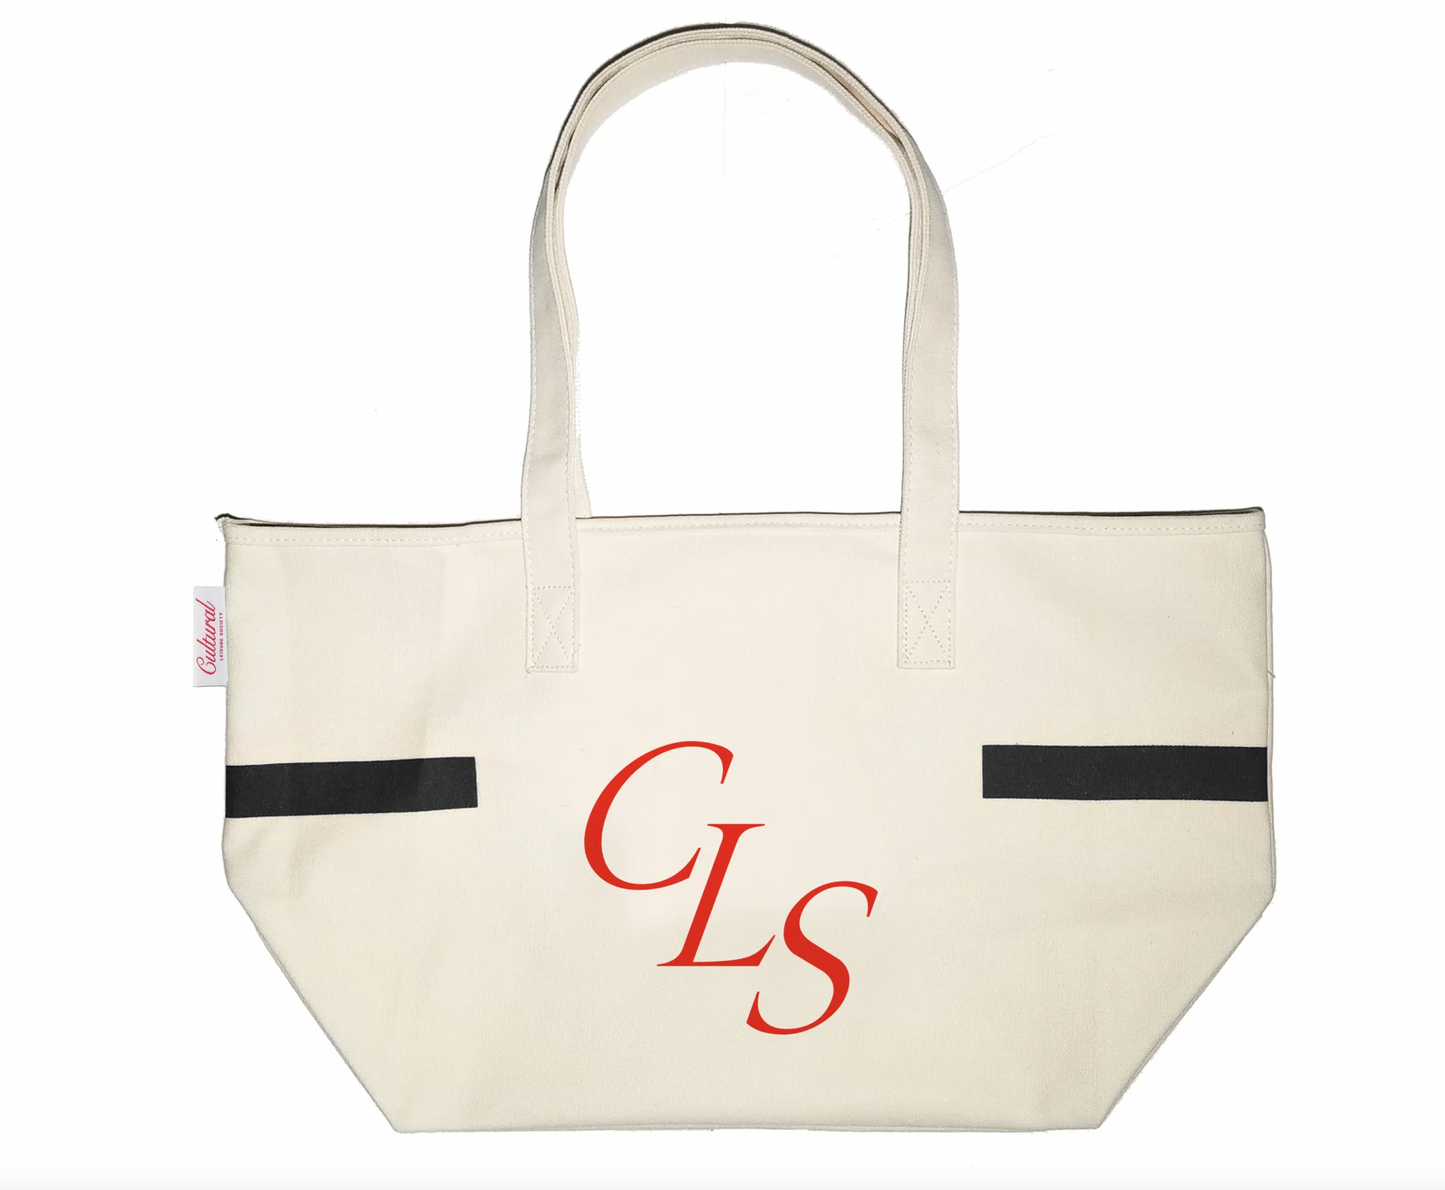 Matter Matters Cultural Leisure Society Tote Bag